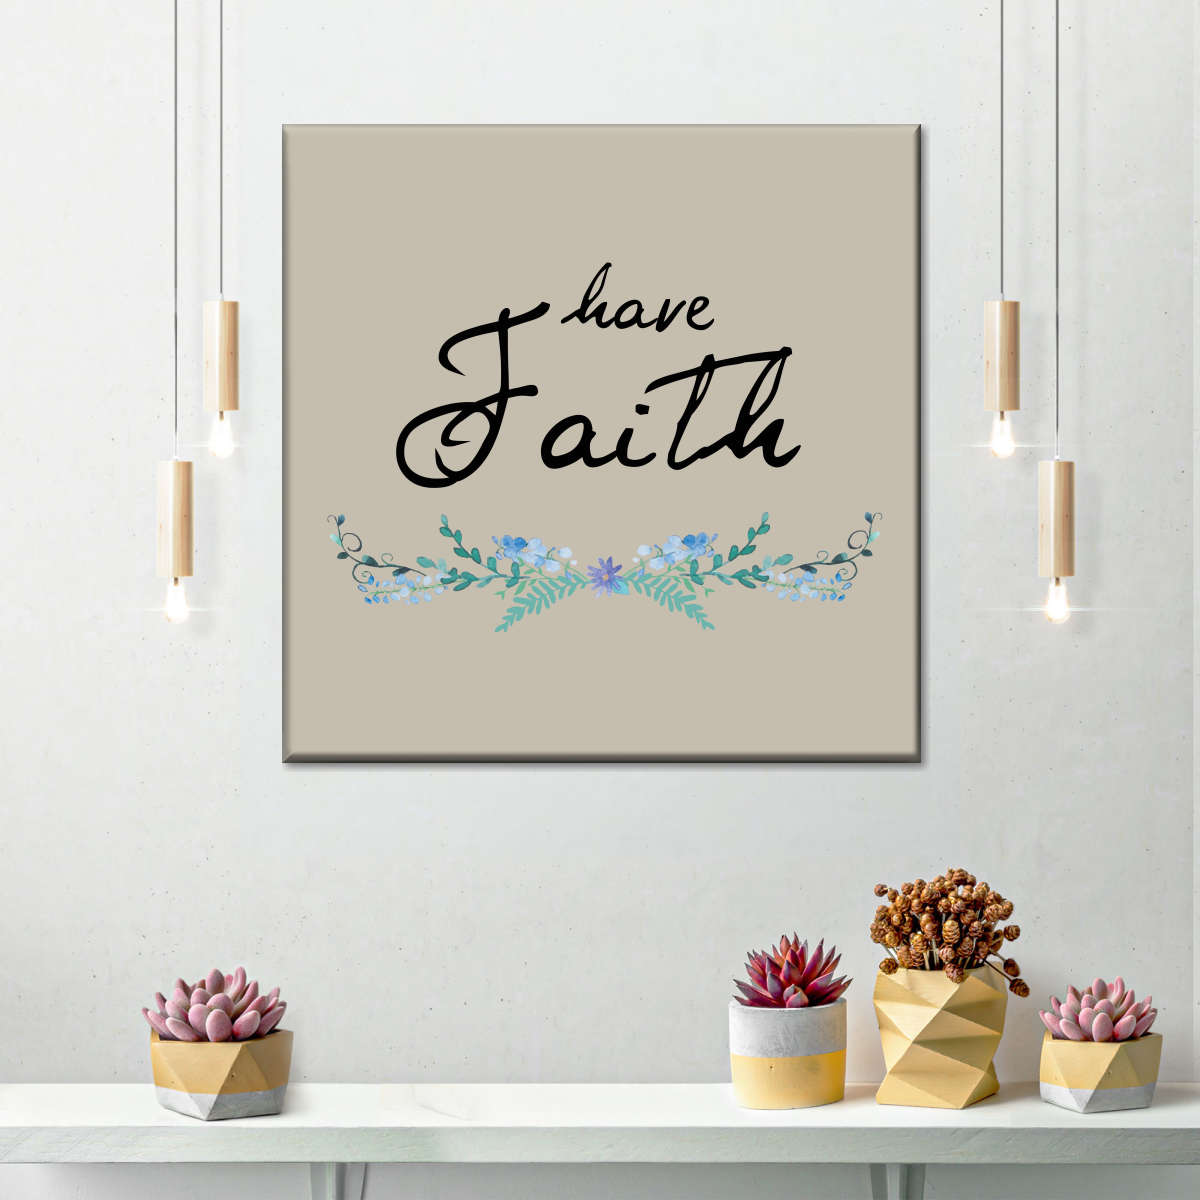 Have Faith Floral Square Canvas Wall Art - Christian Wall Decor - Christian Wall Hanging